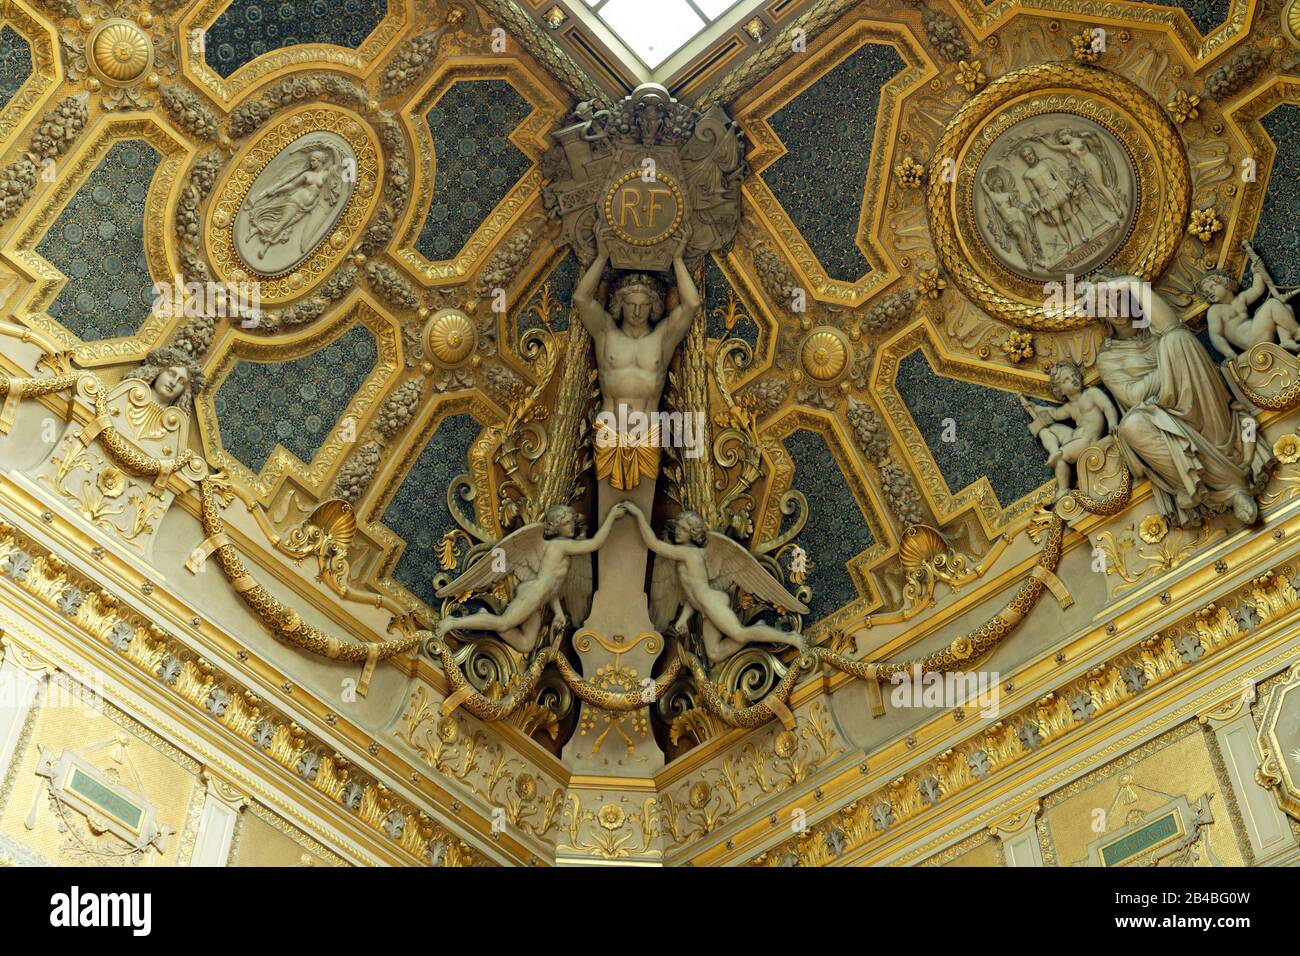 France, Paris, UNESCO World Heritage Site, Louvre museum, Salon Carre (Squared Room), built in 1661 by architect Louis Le Vau, Ceiling completed in 1851 and devoted to the arts Stock Photo